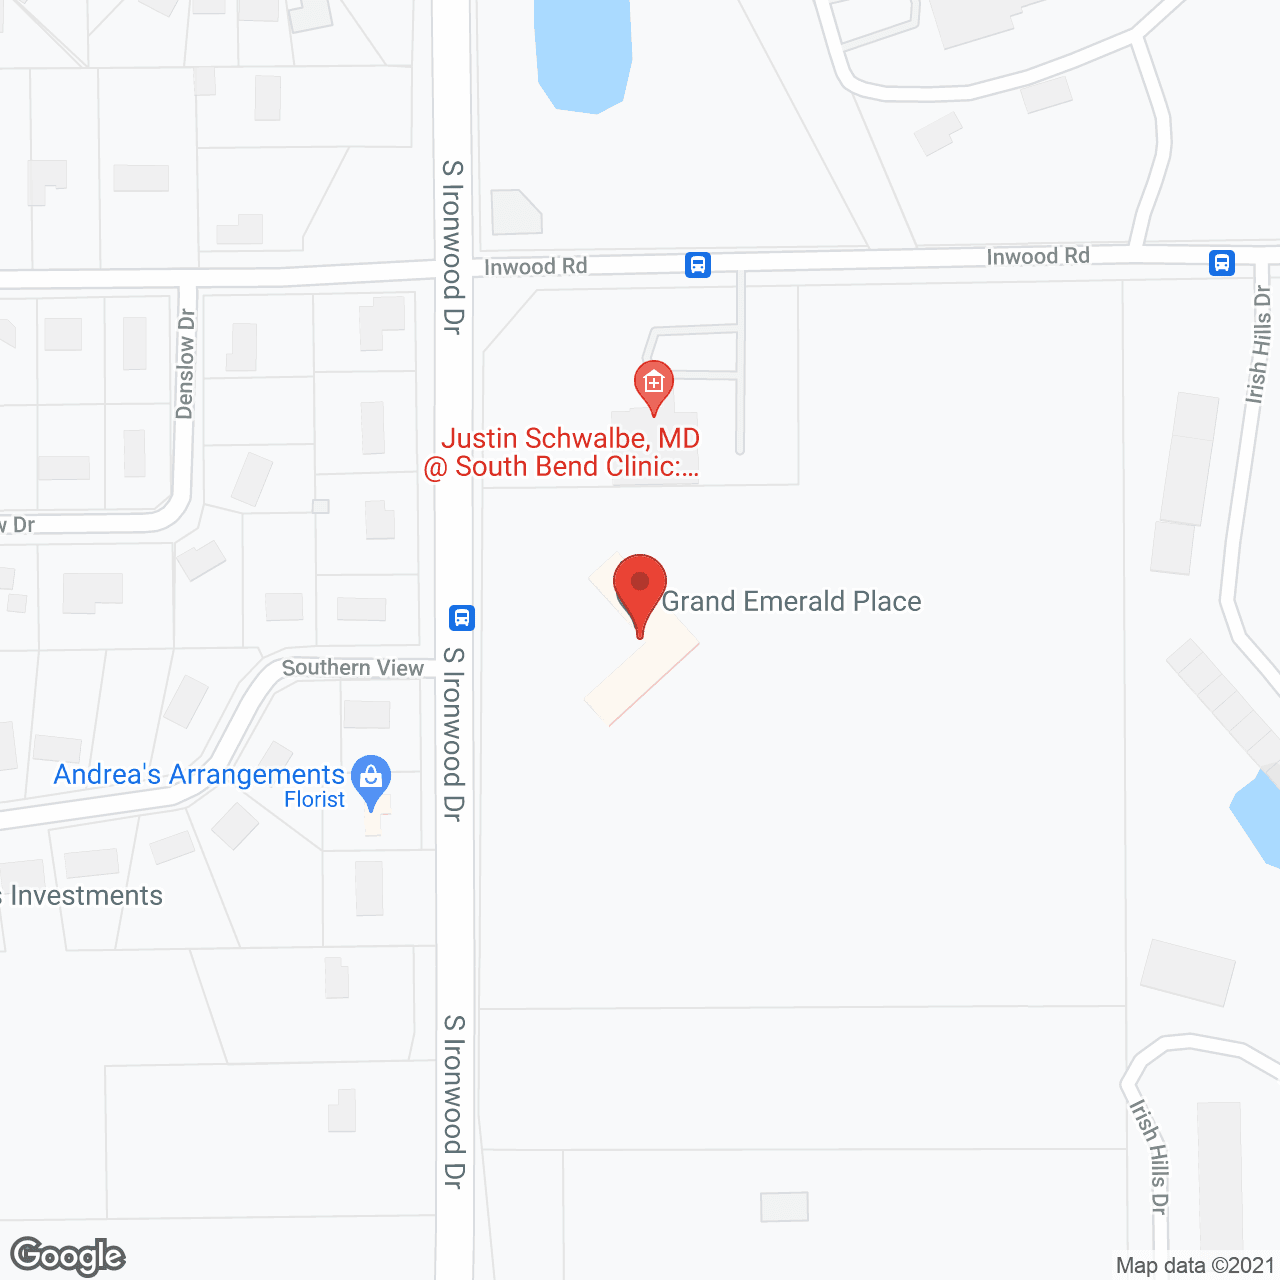 Grand Emerald Place in google map